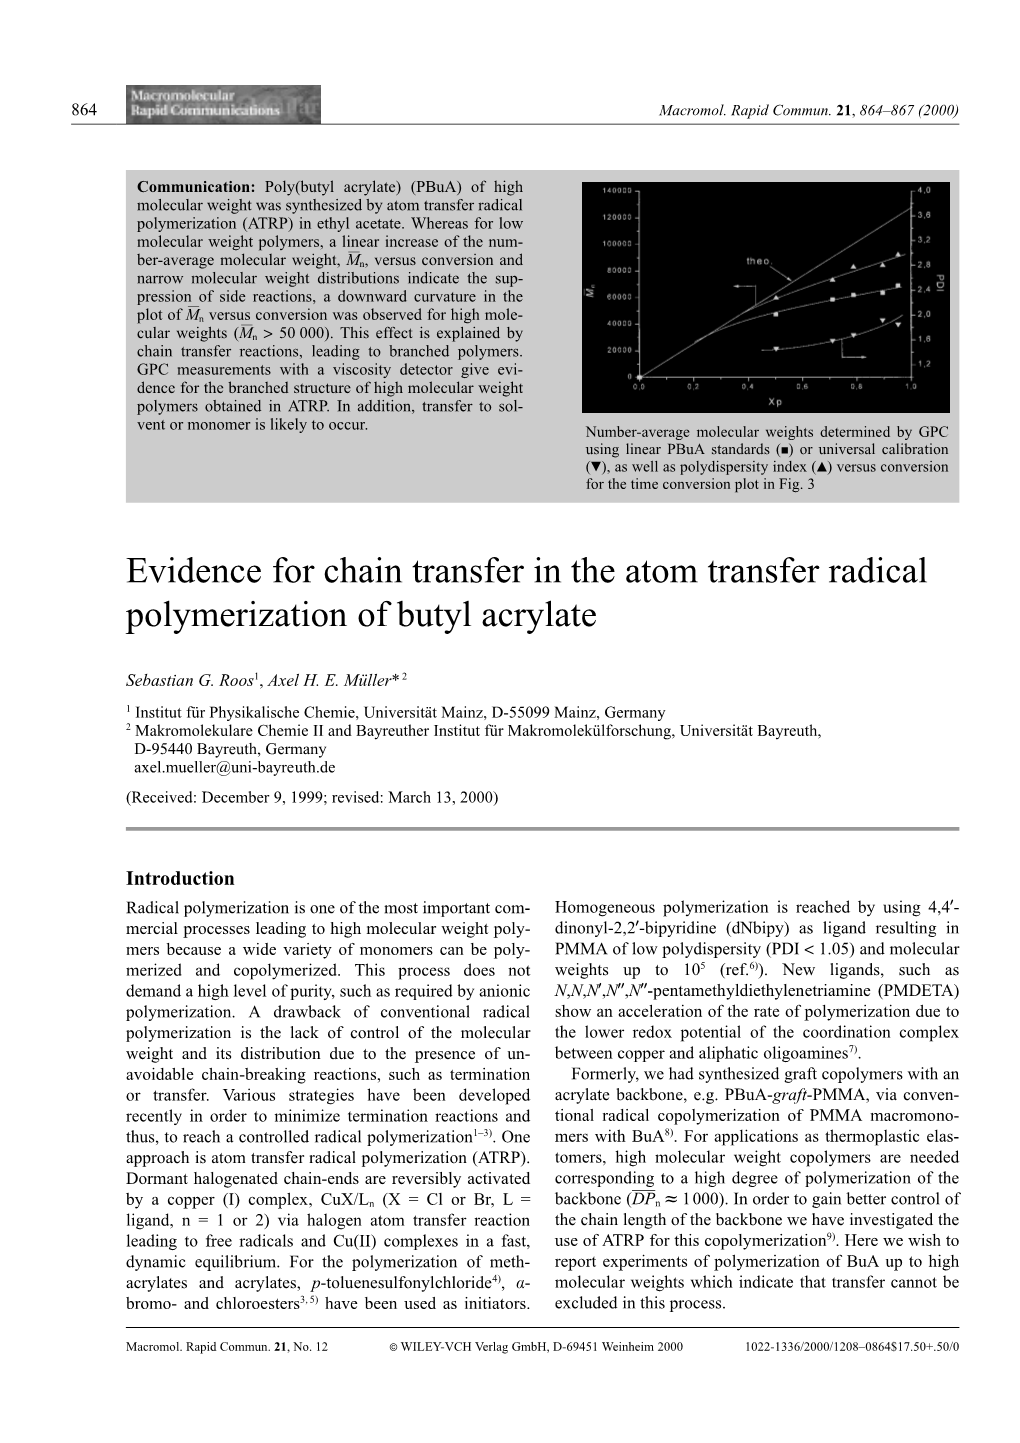 Evidence for Chain Transfer in the Atom Transfer Radical Polymerization of Butyl Acrylate